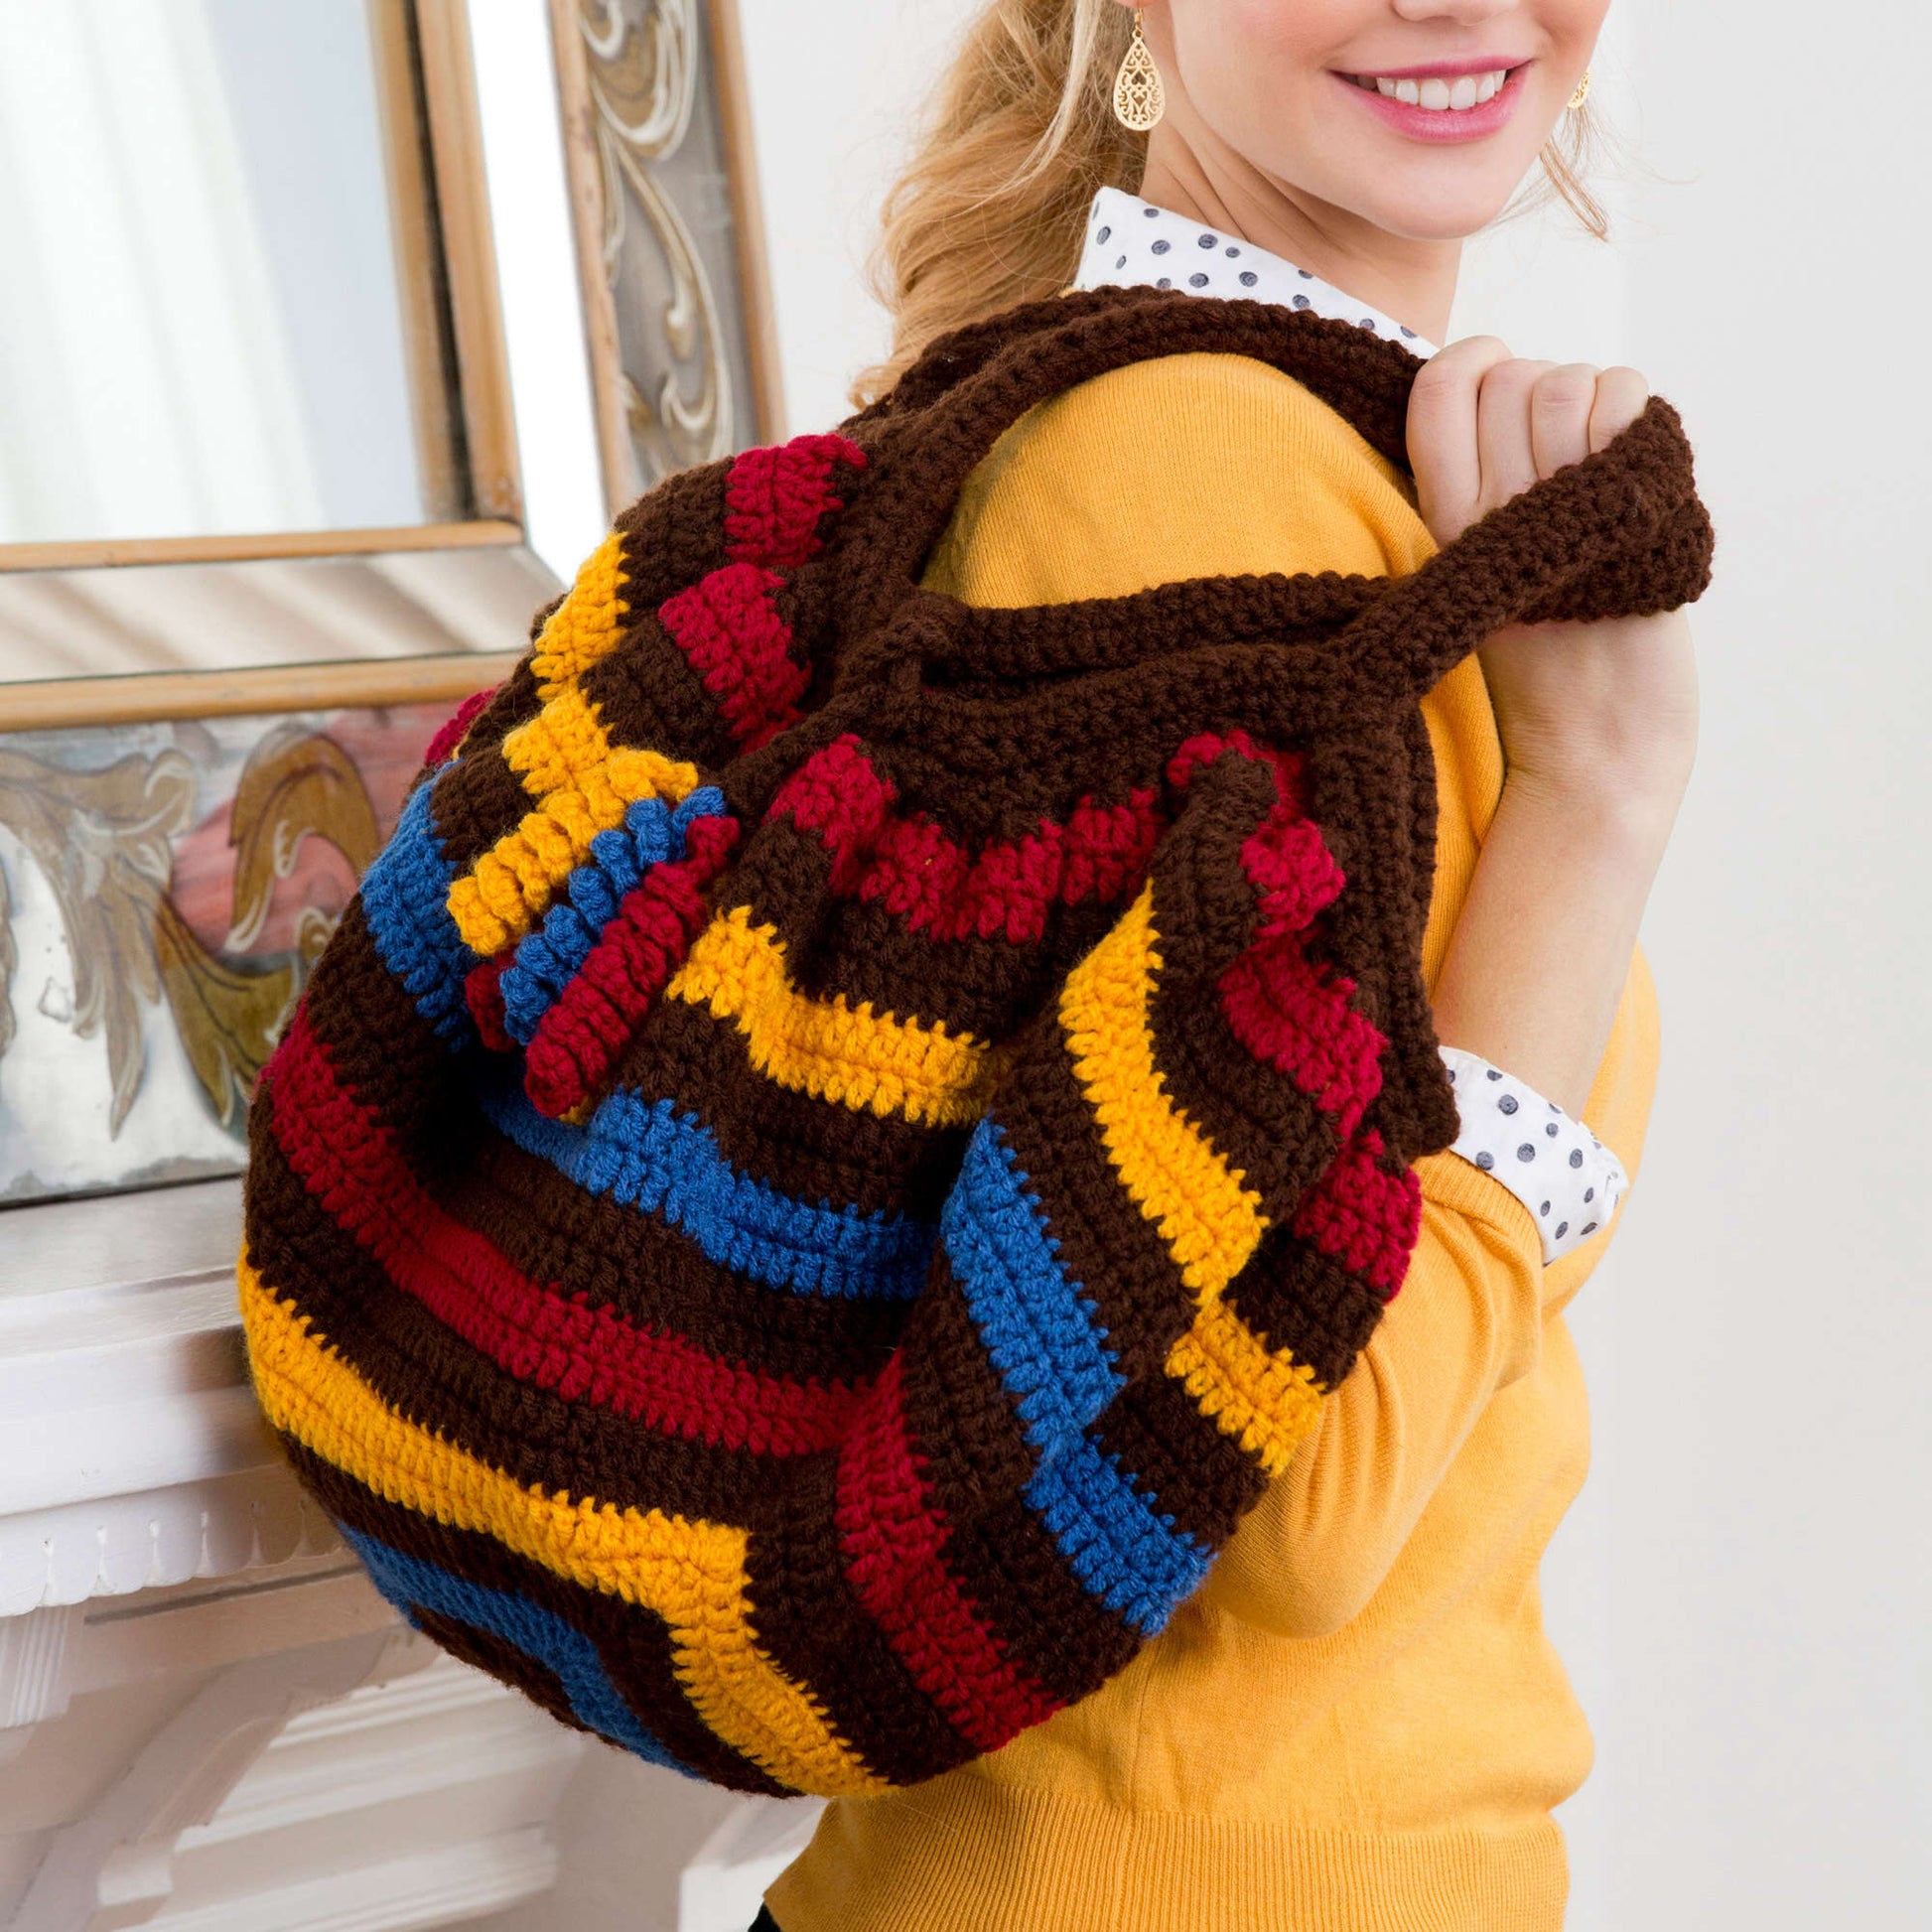 Free Red Heart Phat Fat Bag Pattern